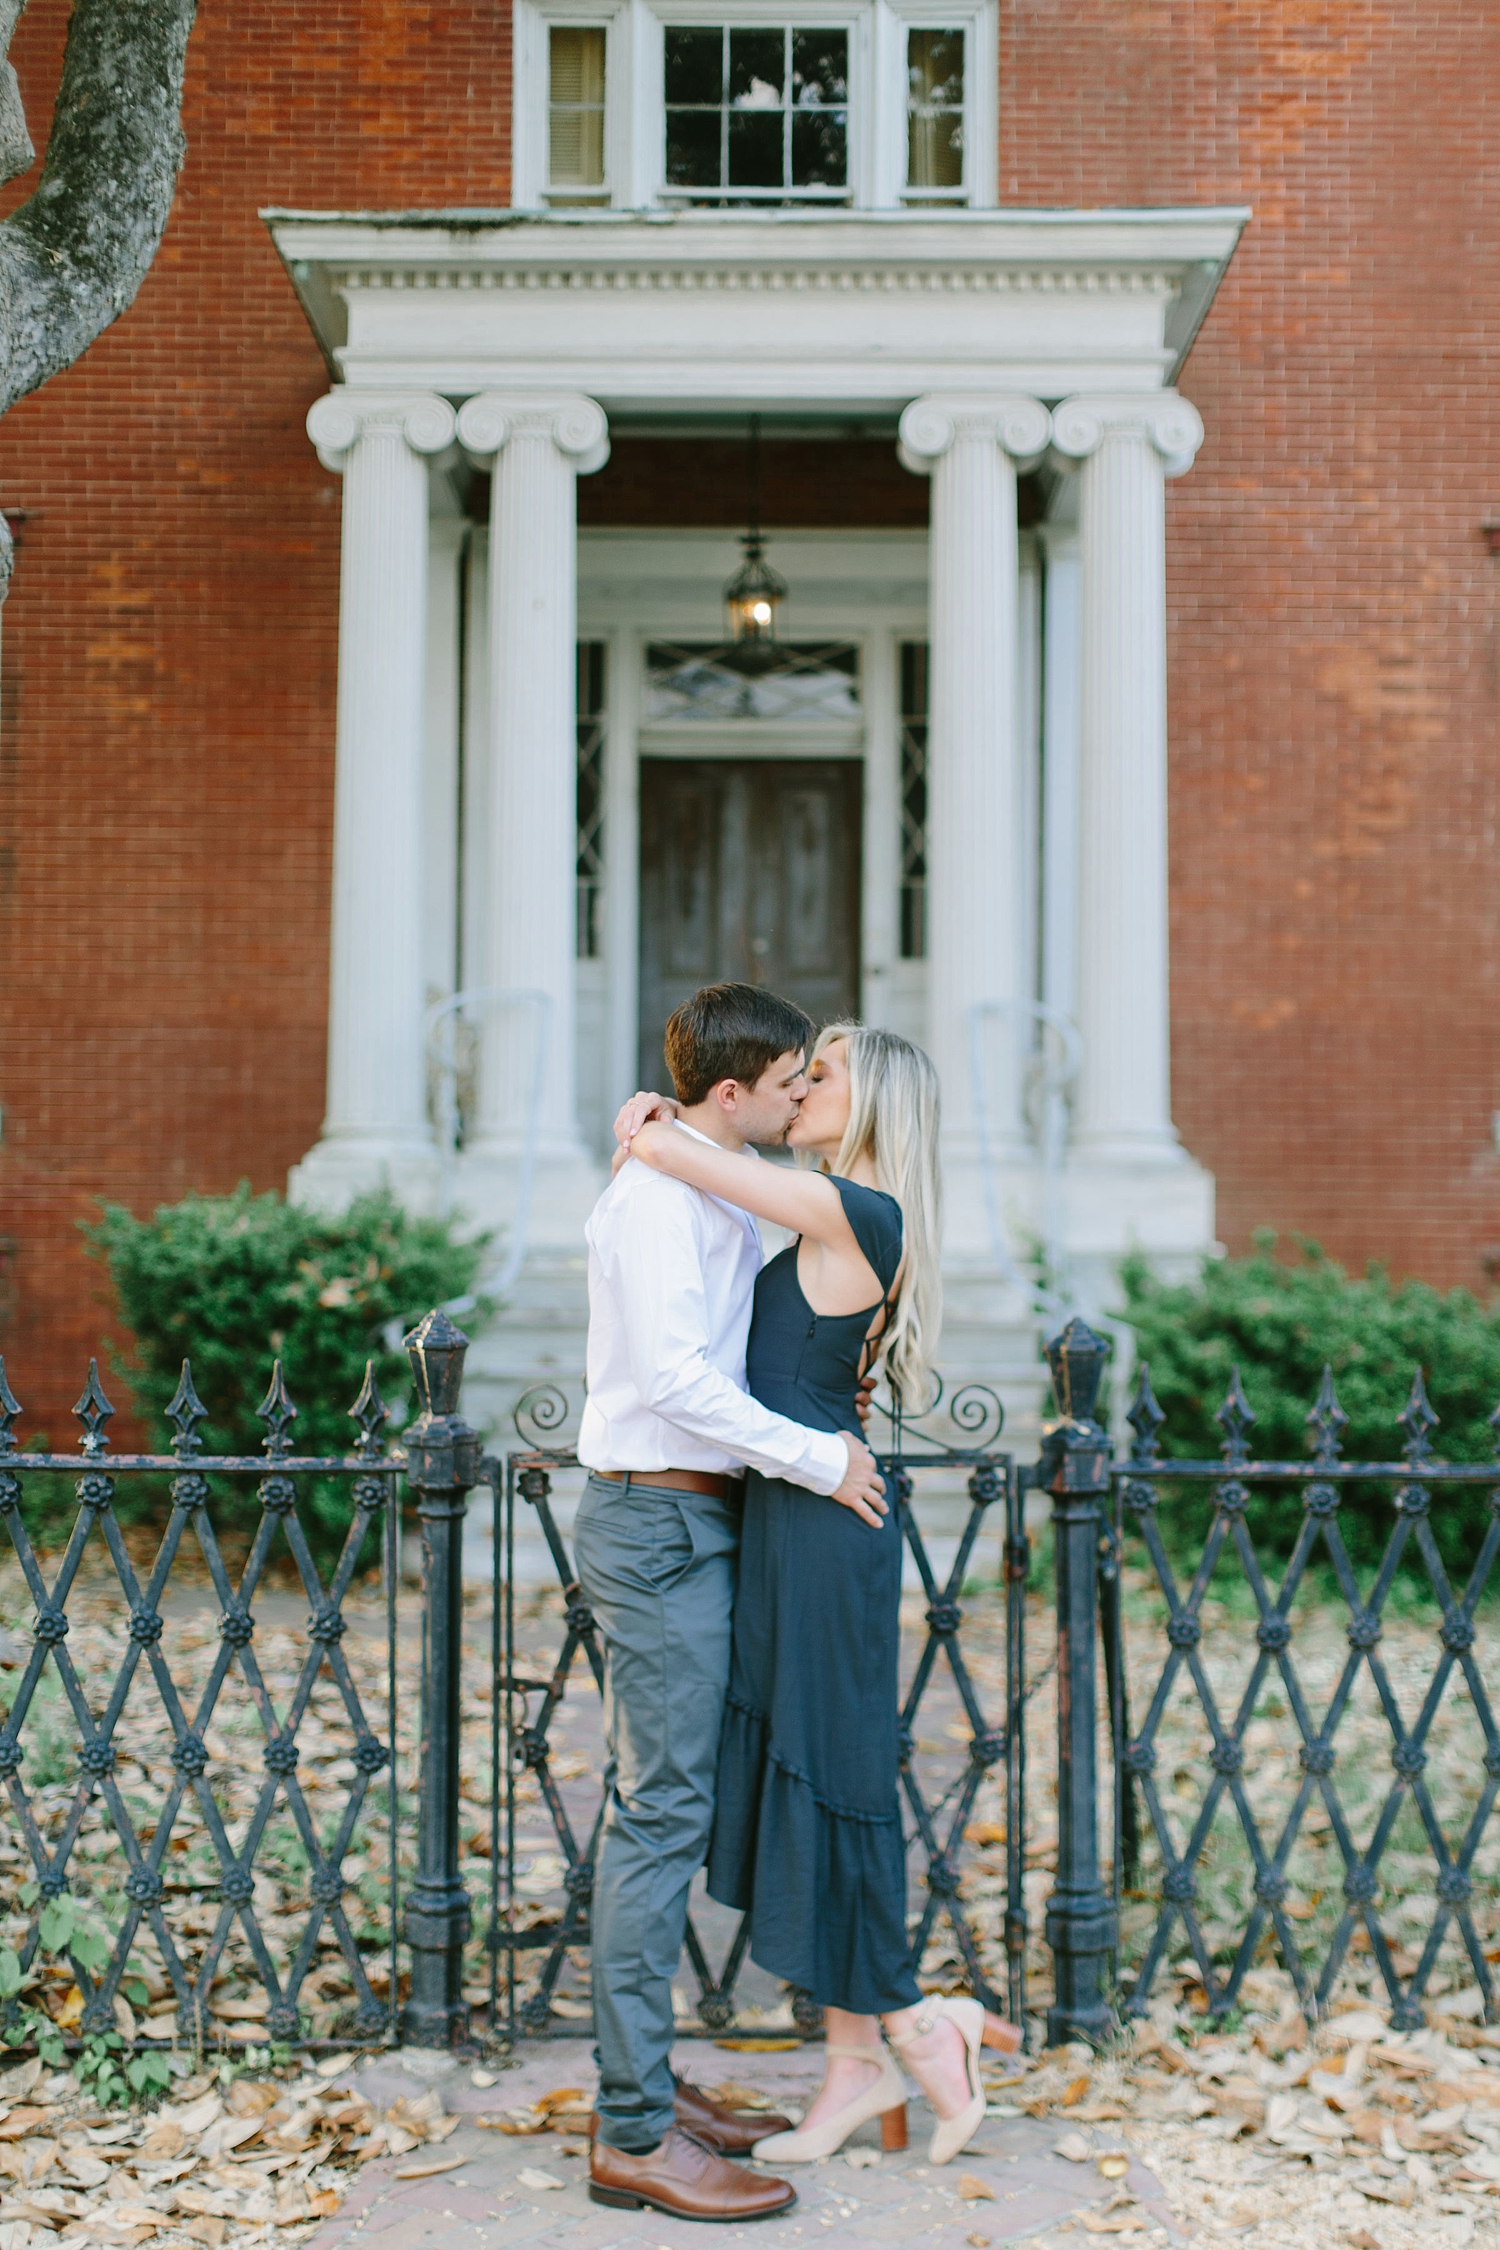 Couple kissing in front of historic building in Colonial Williamsburg